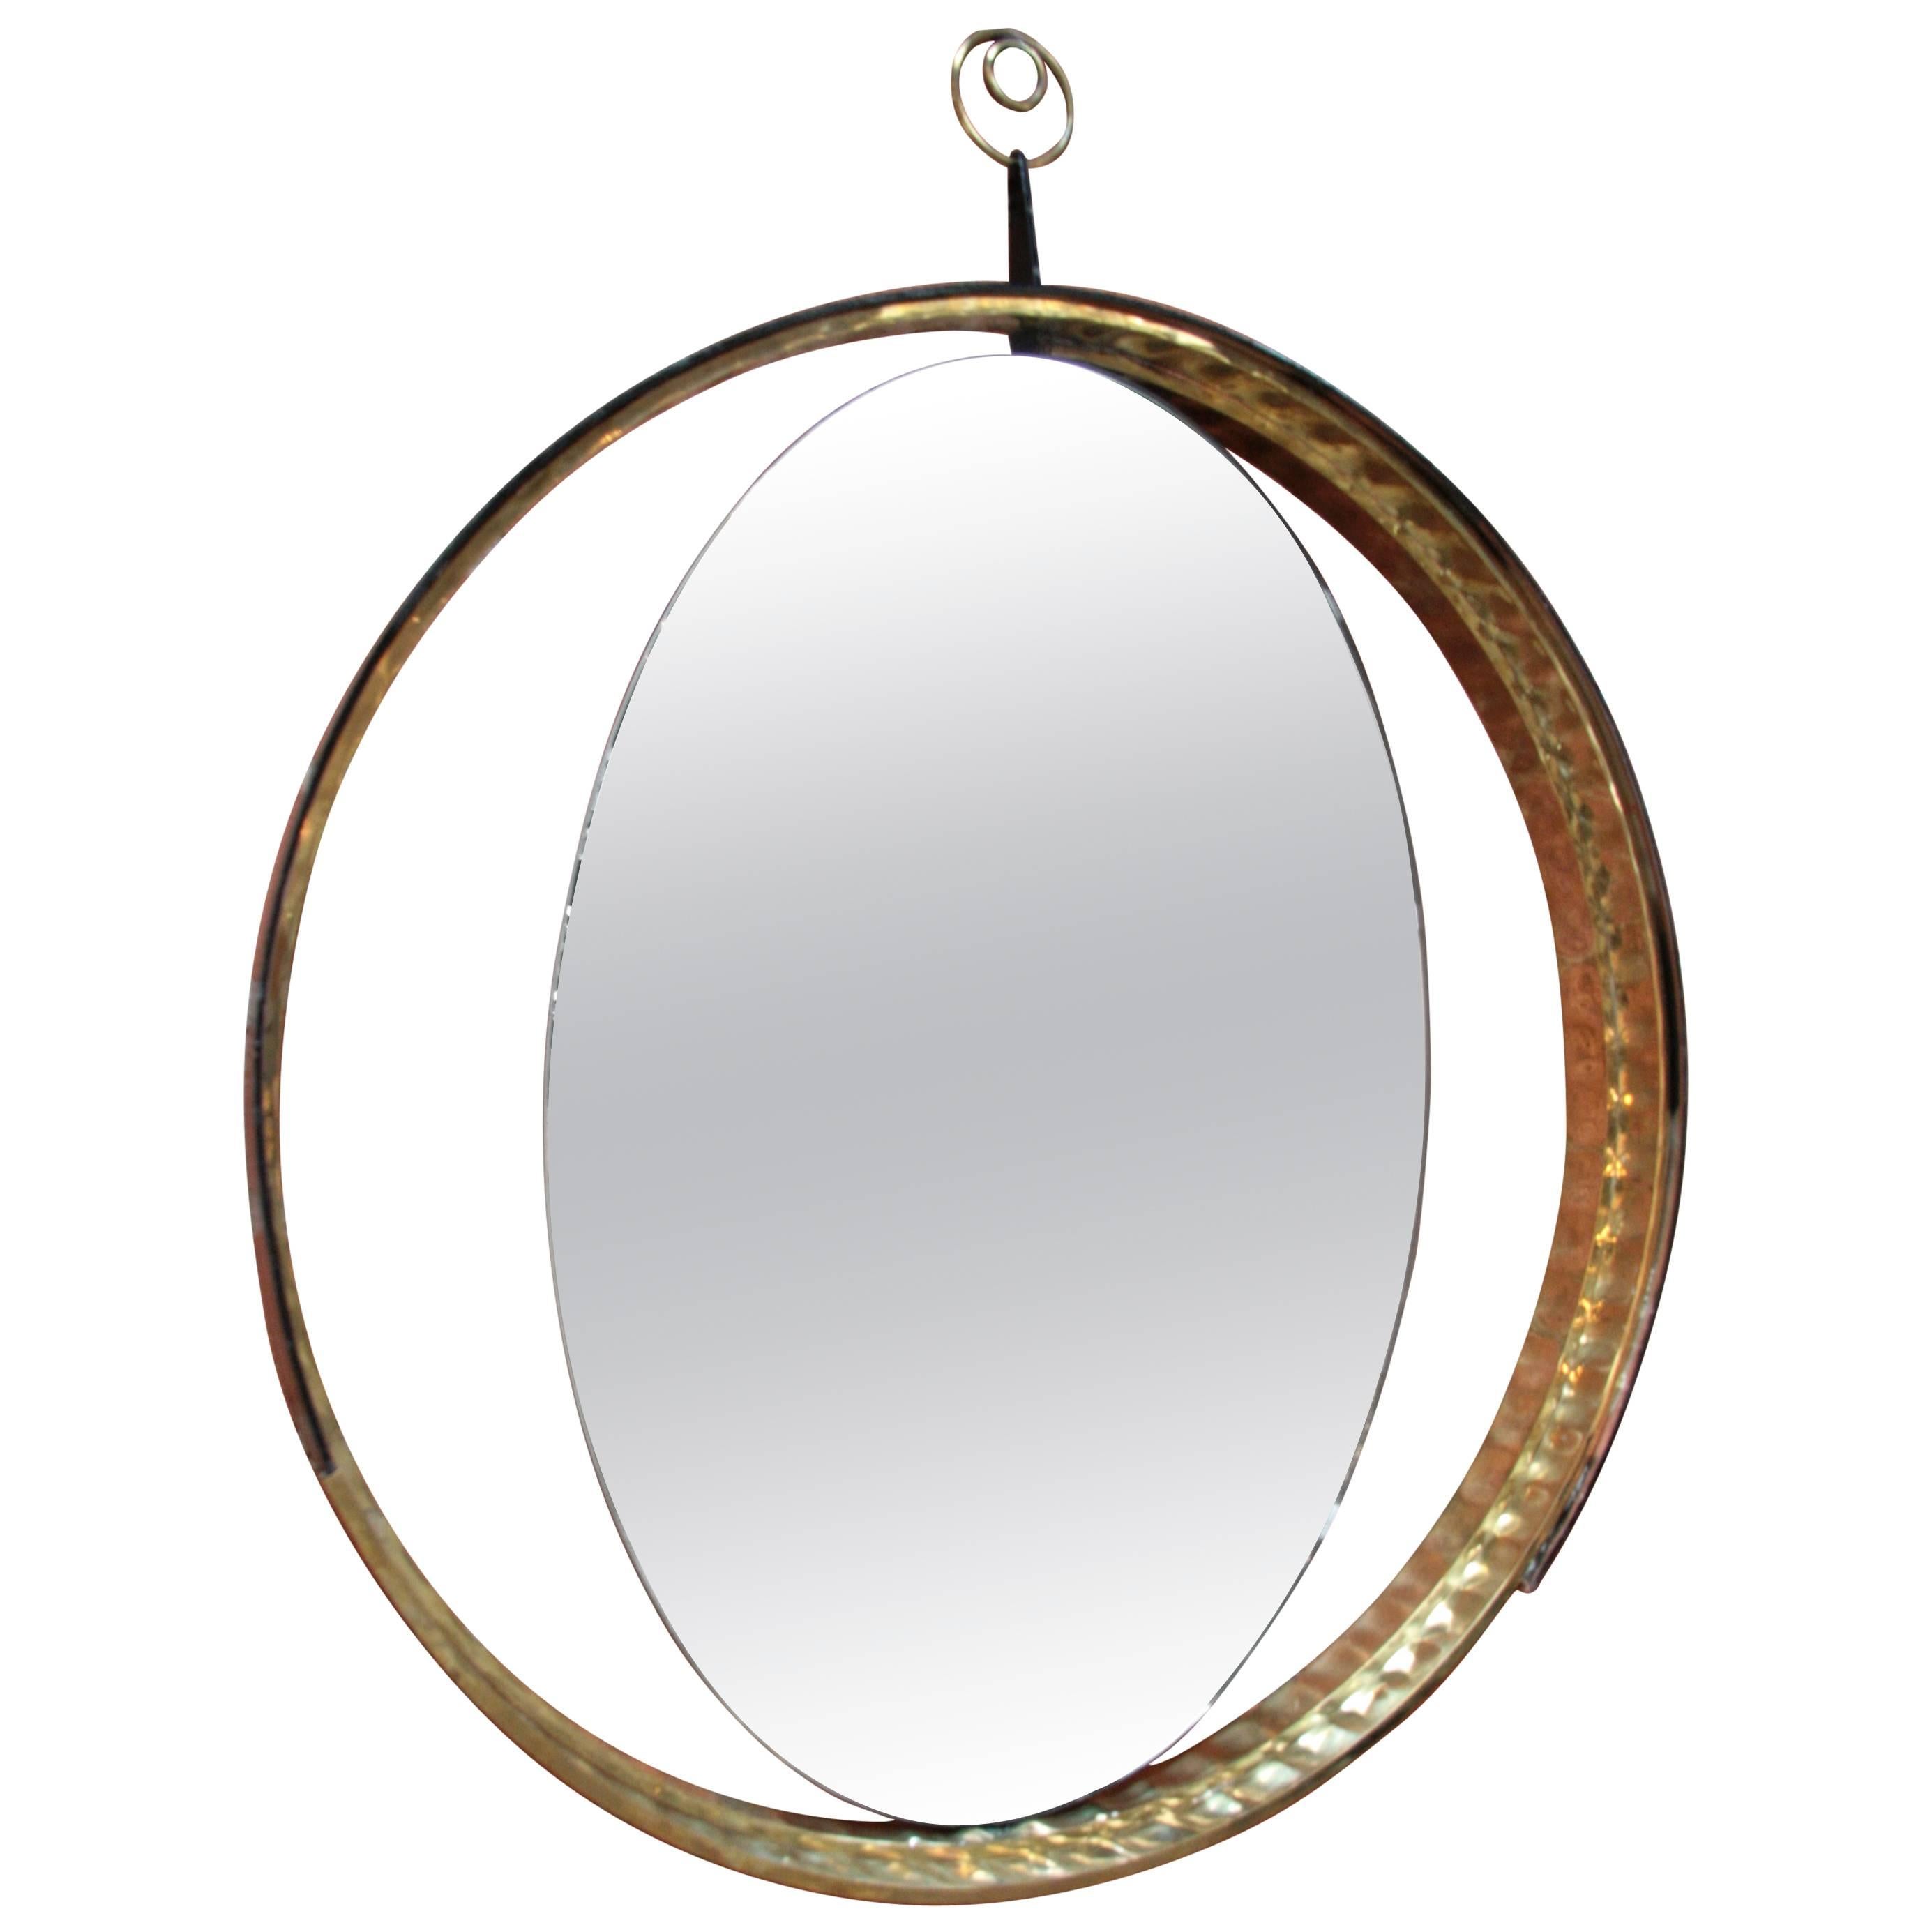 Italian Mirror with Wood and Brass Frame